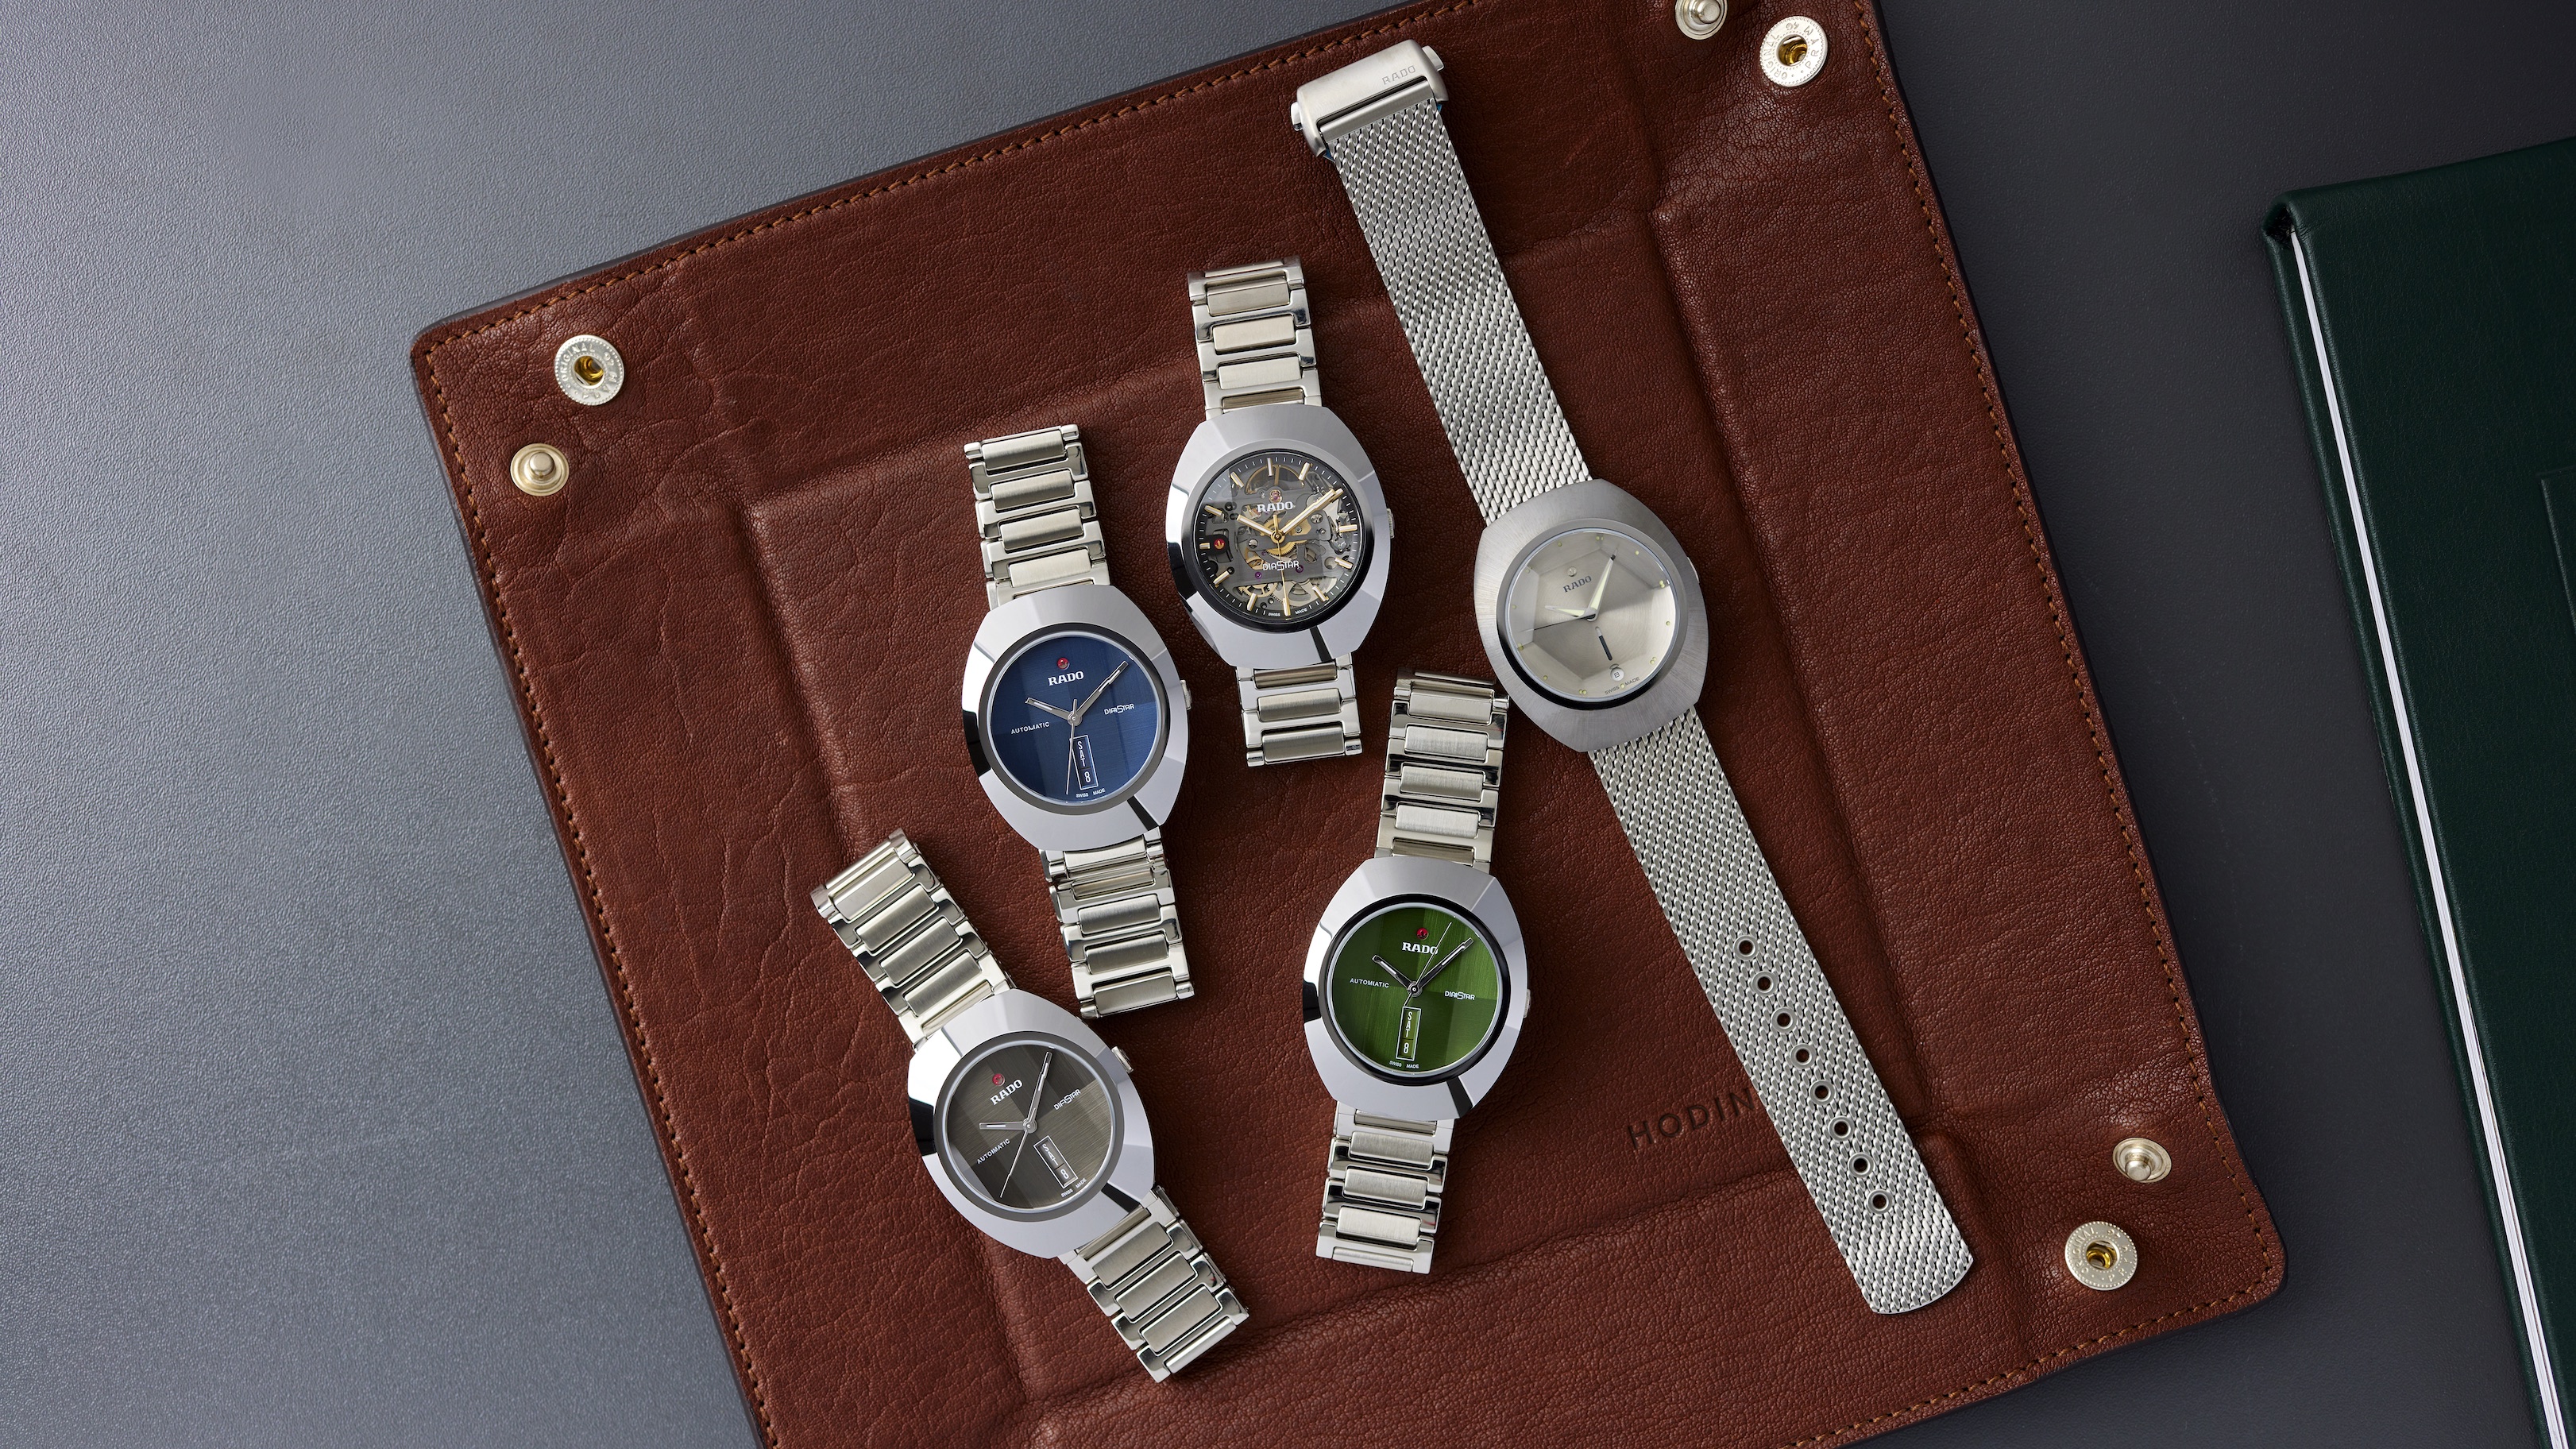 Introducing The New Two-Tone Rado Captain Cook Automatic 42mm Models